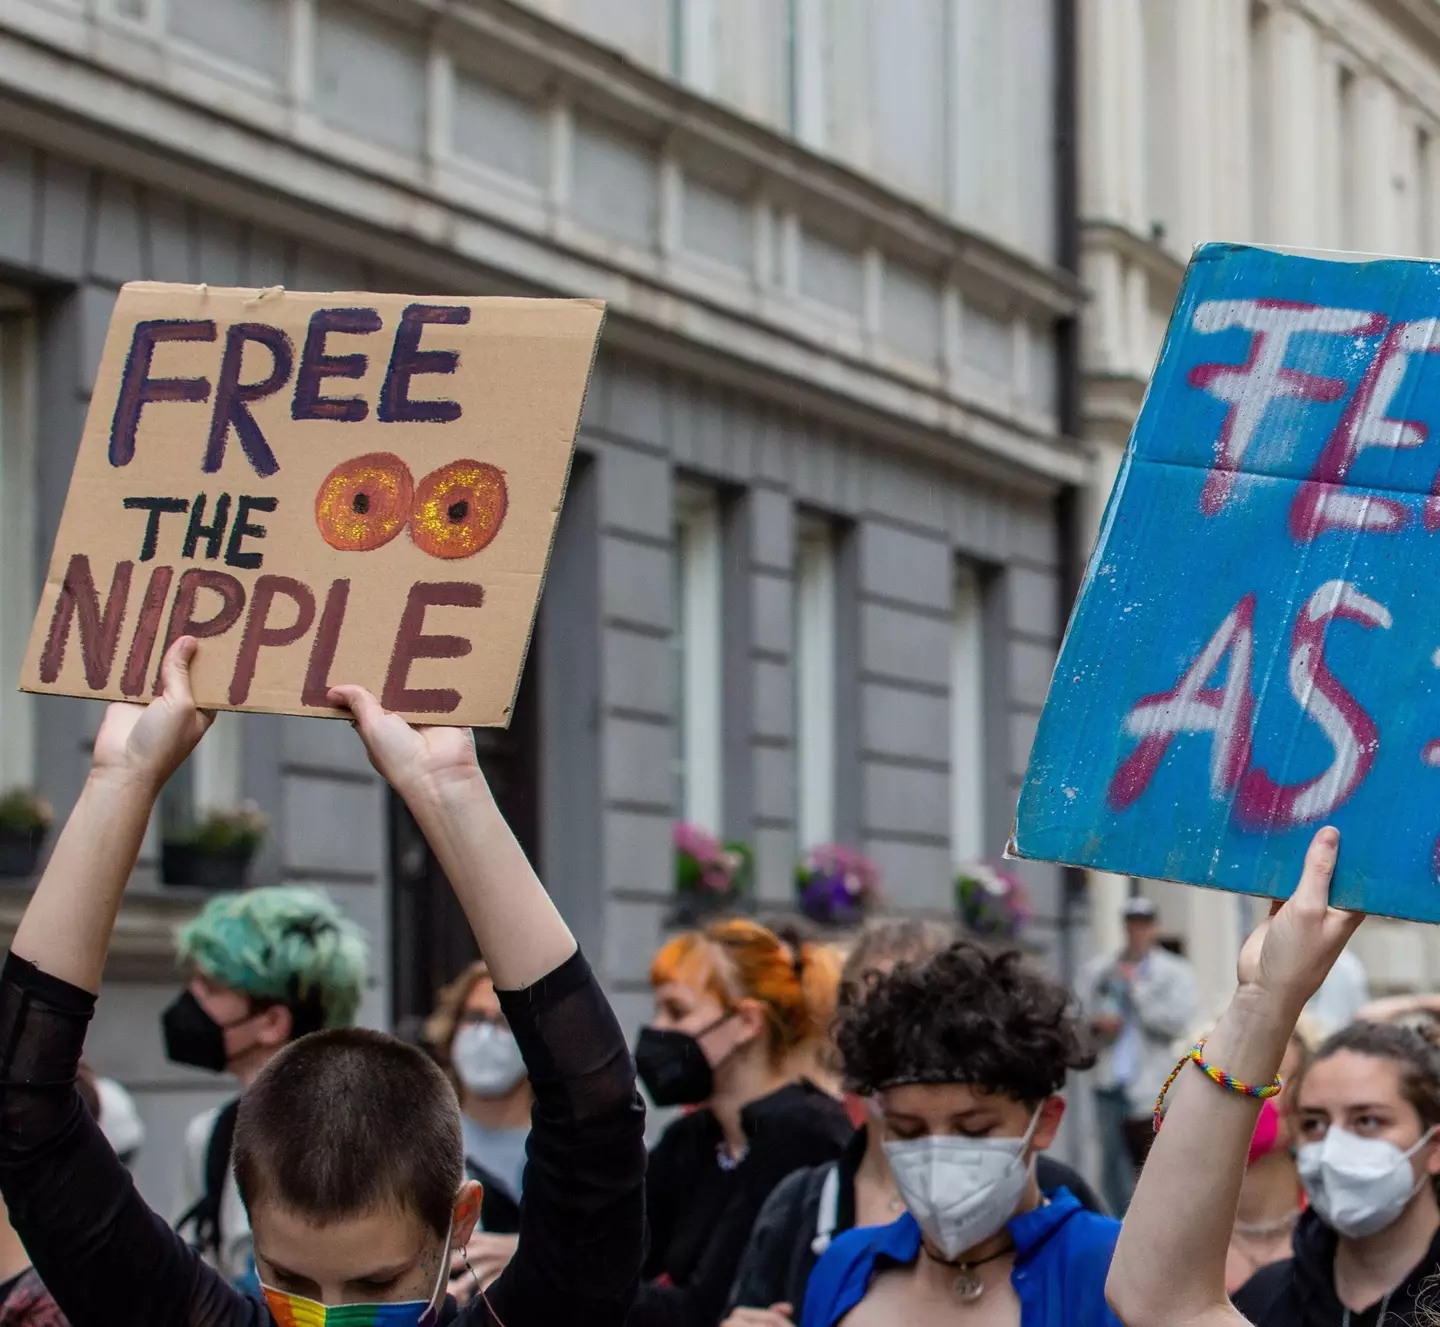 The #freethenipple campaign started in 2012.